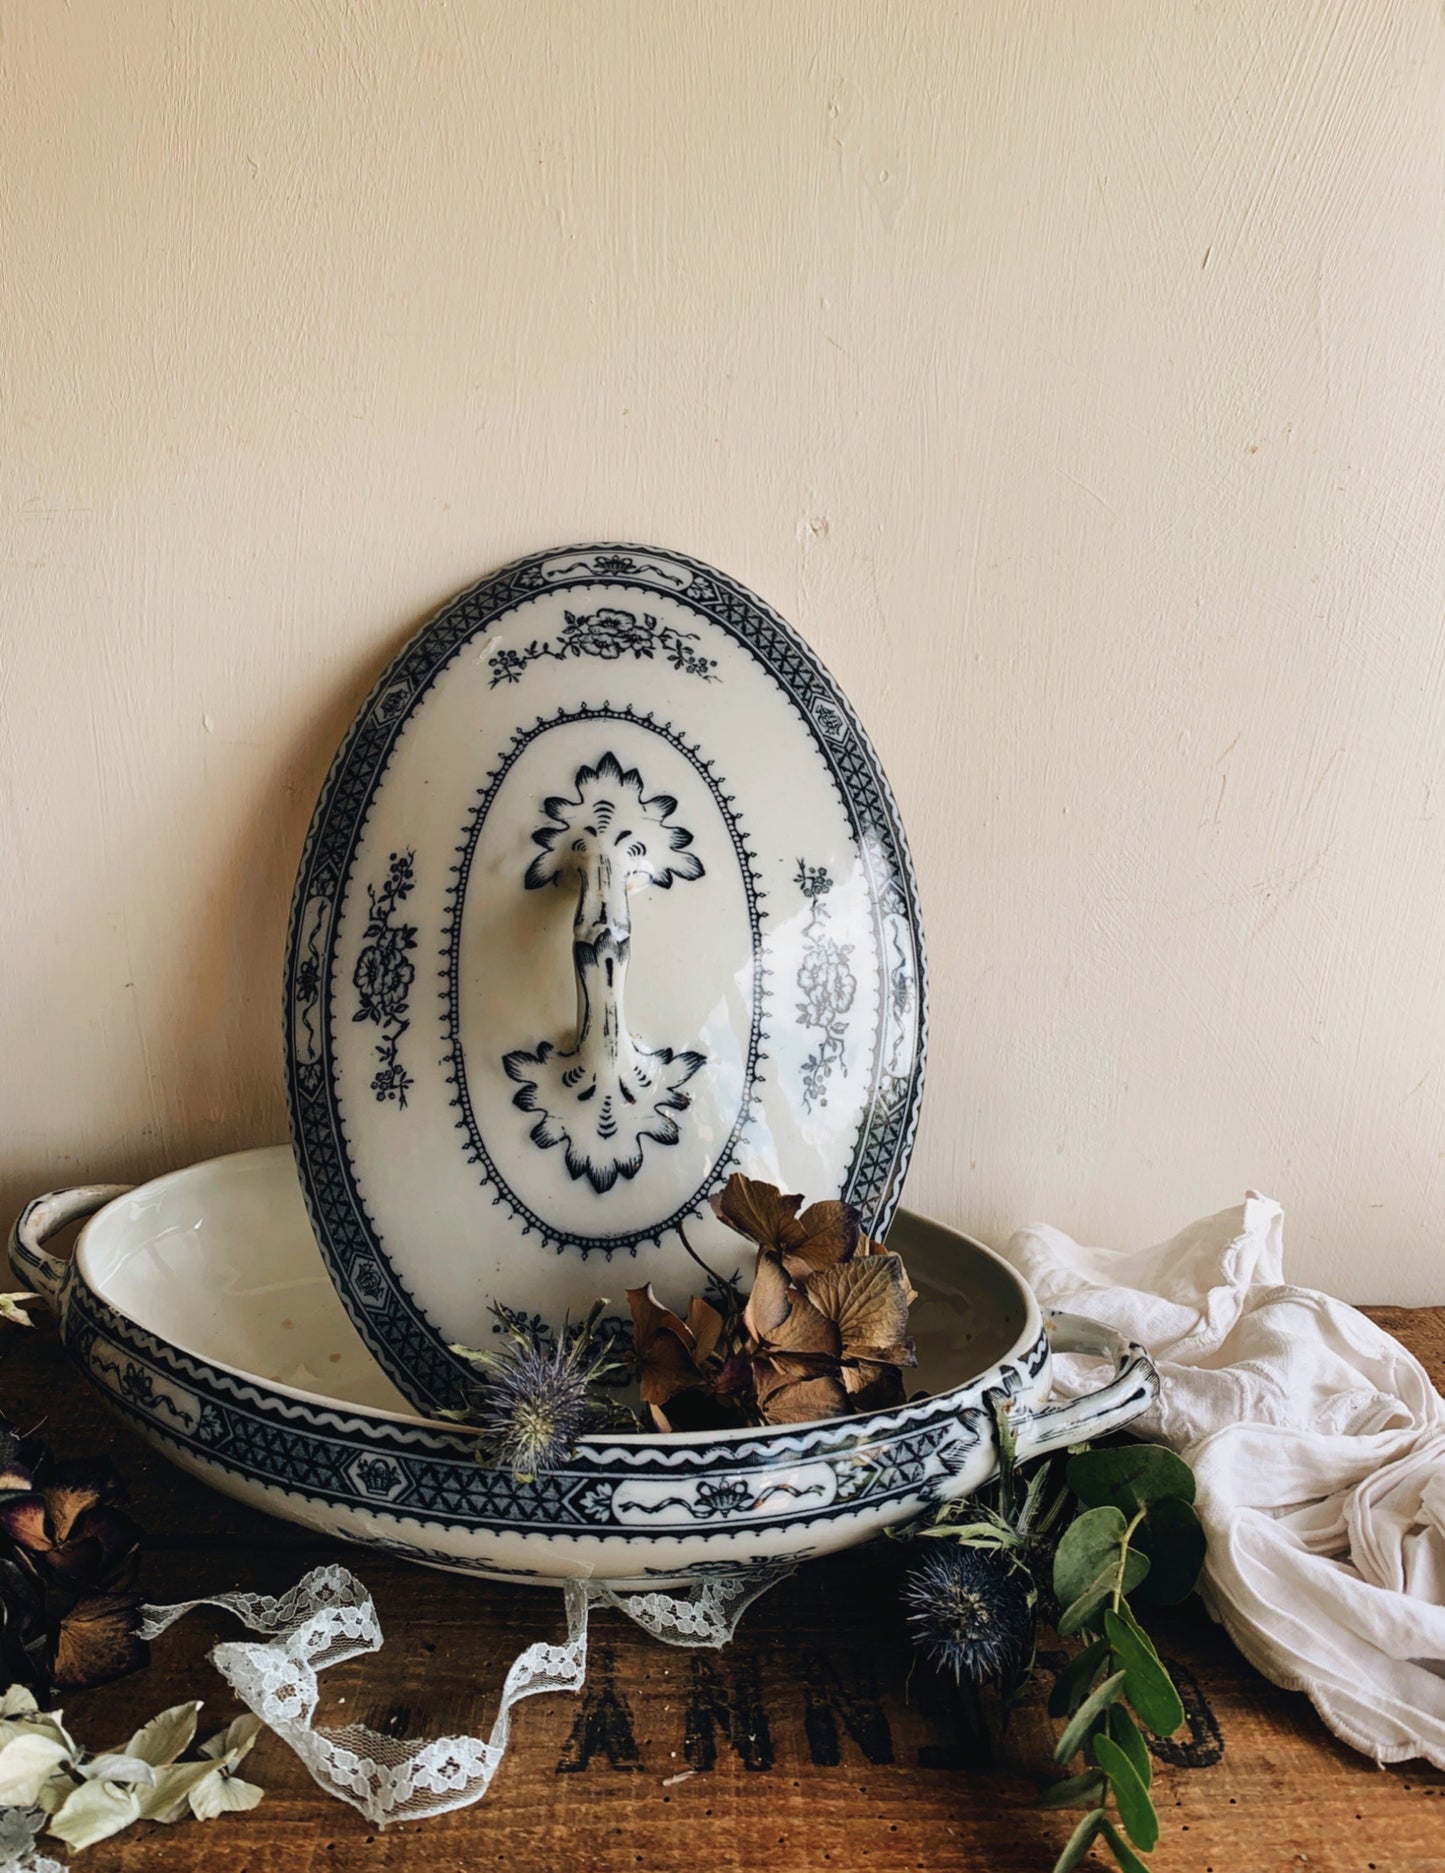 Large Antique Decorative Dish with Lid